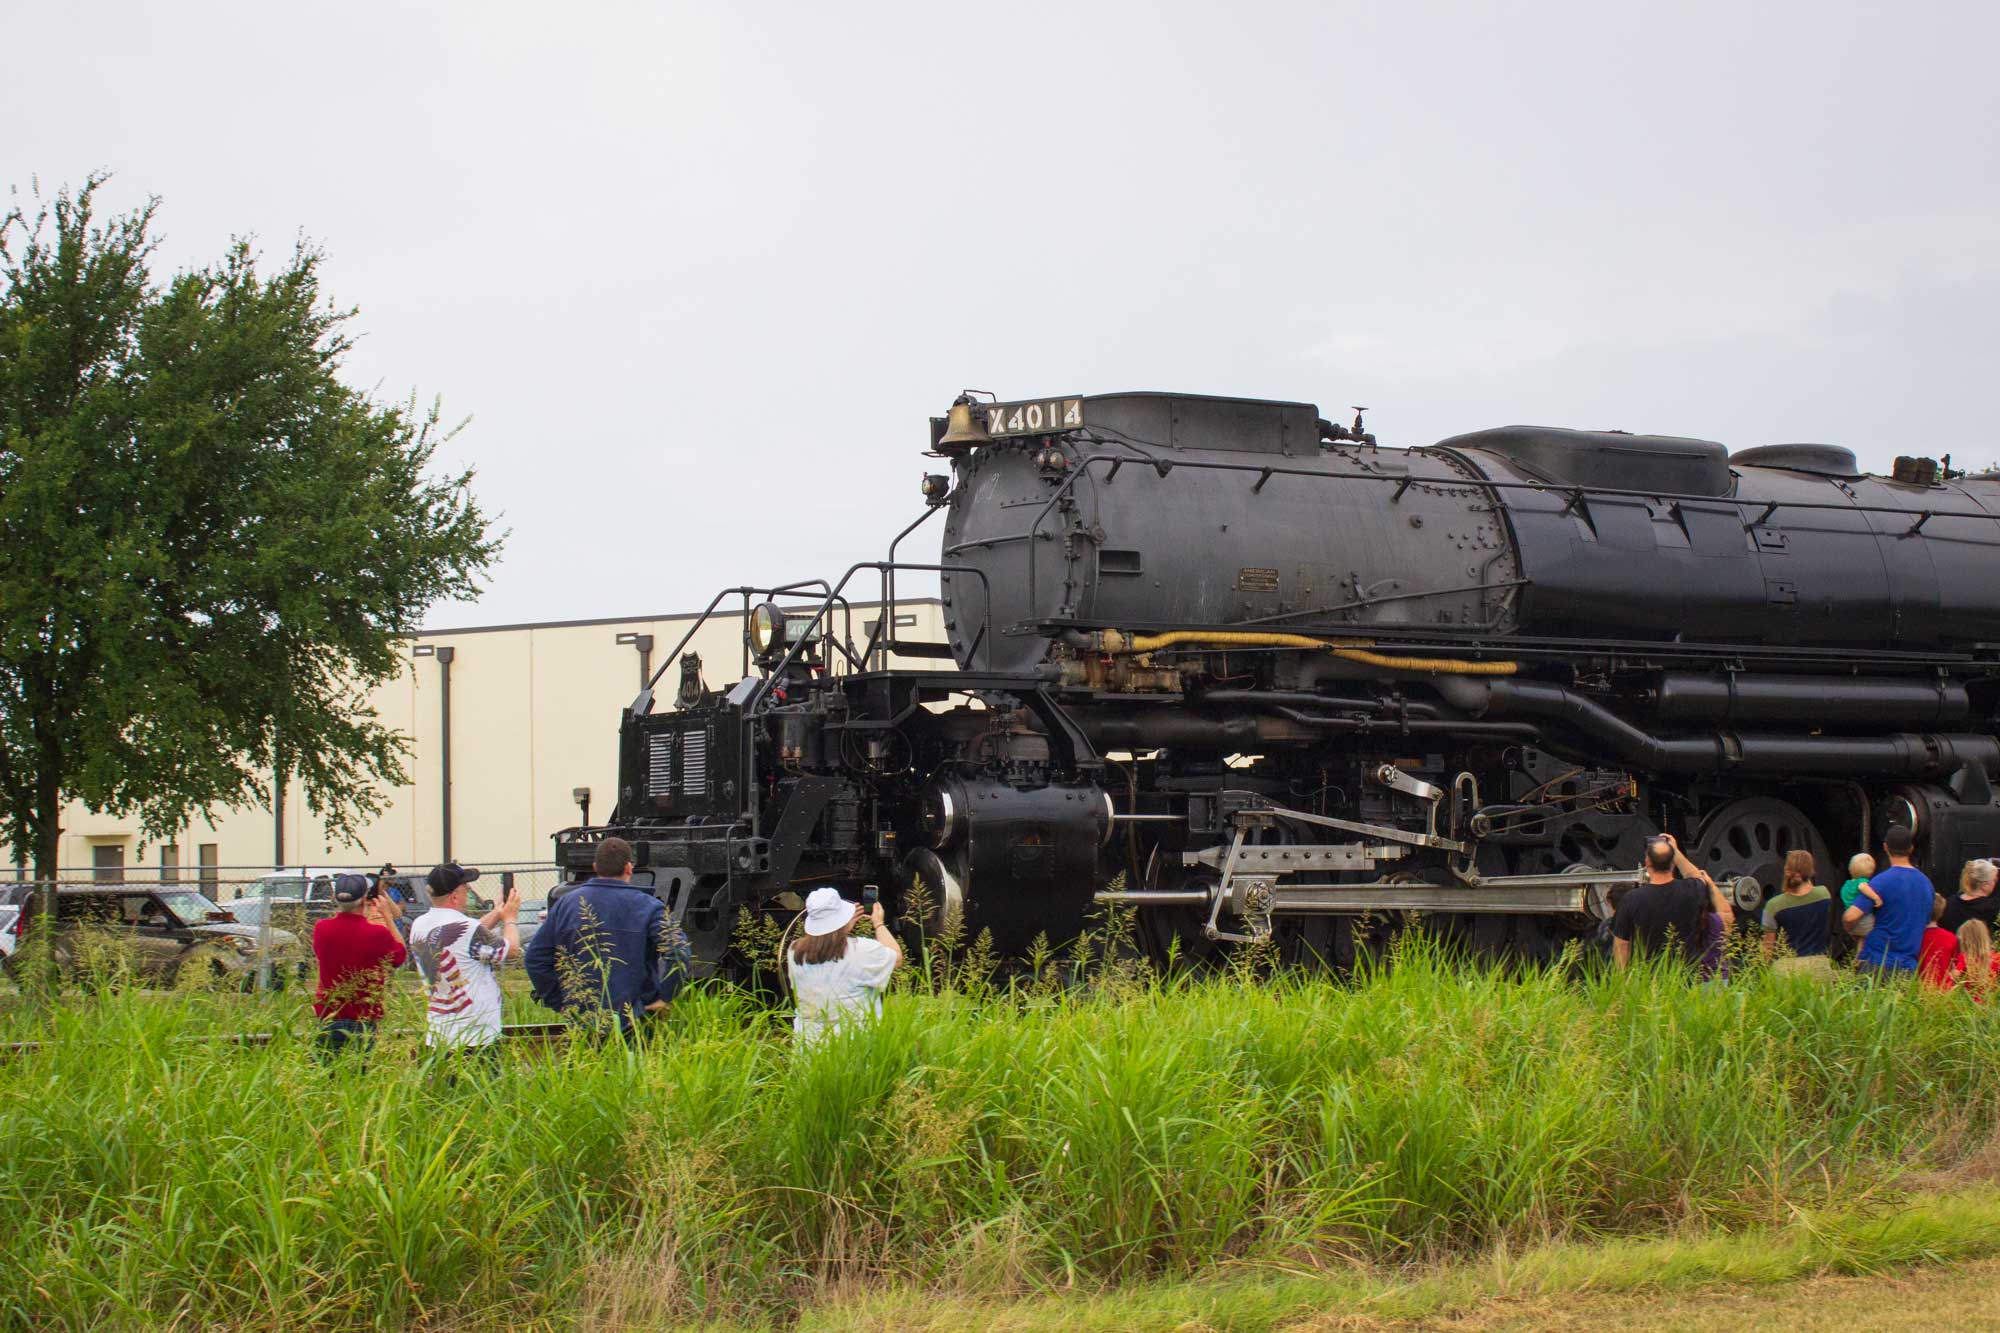 The Big Boy steam locomotive rolling passed people standing in a field